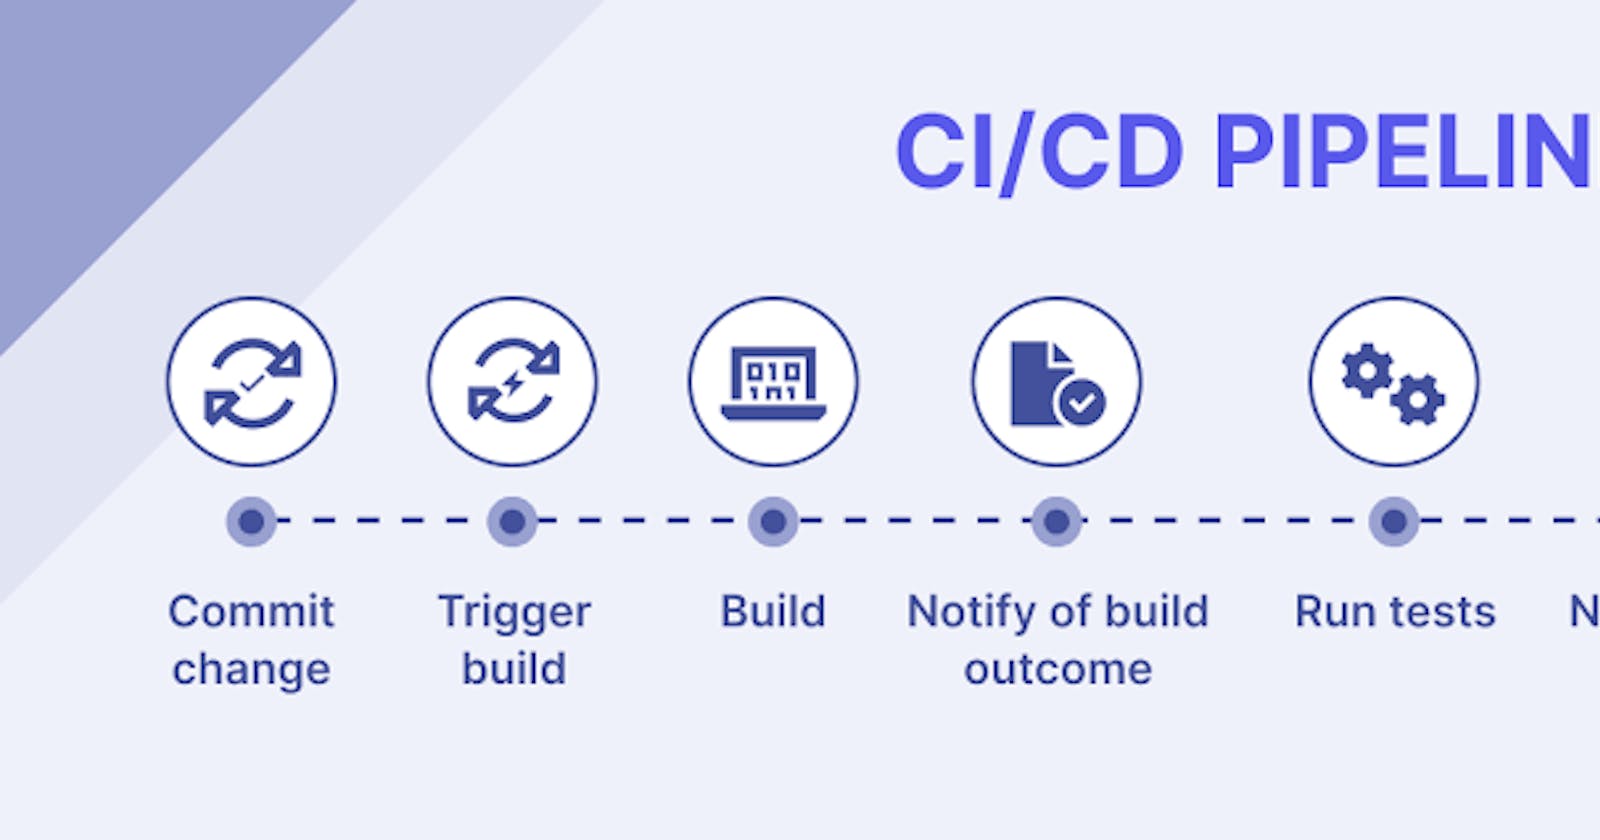 Key components of a CI/CD pipeline